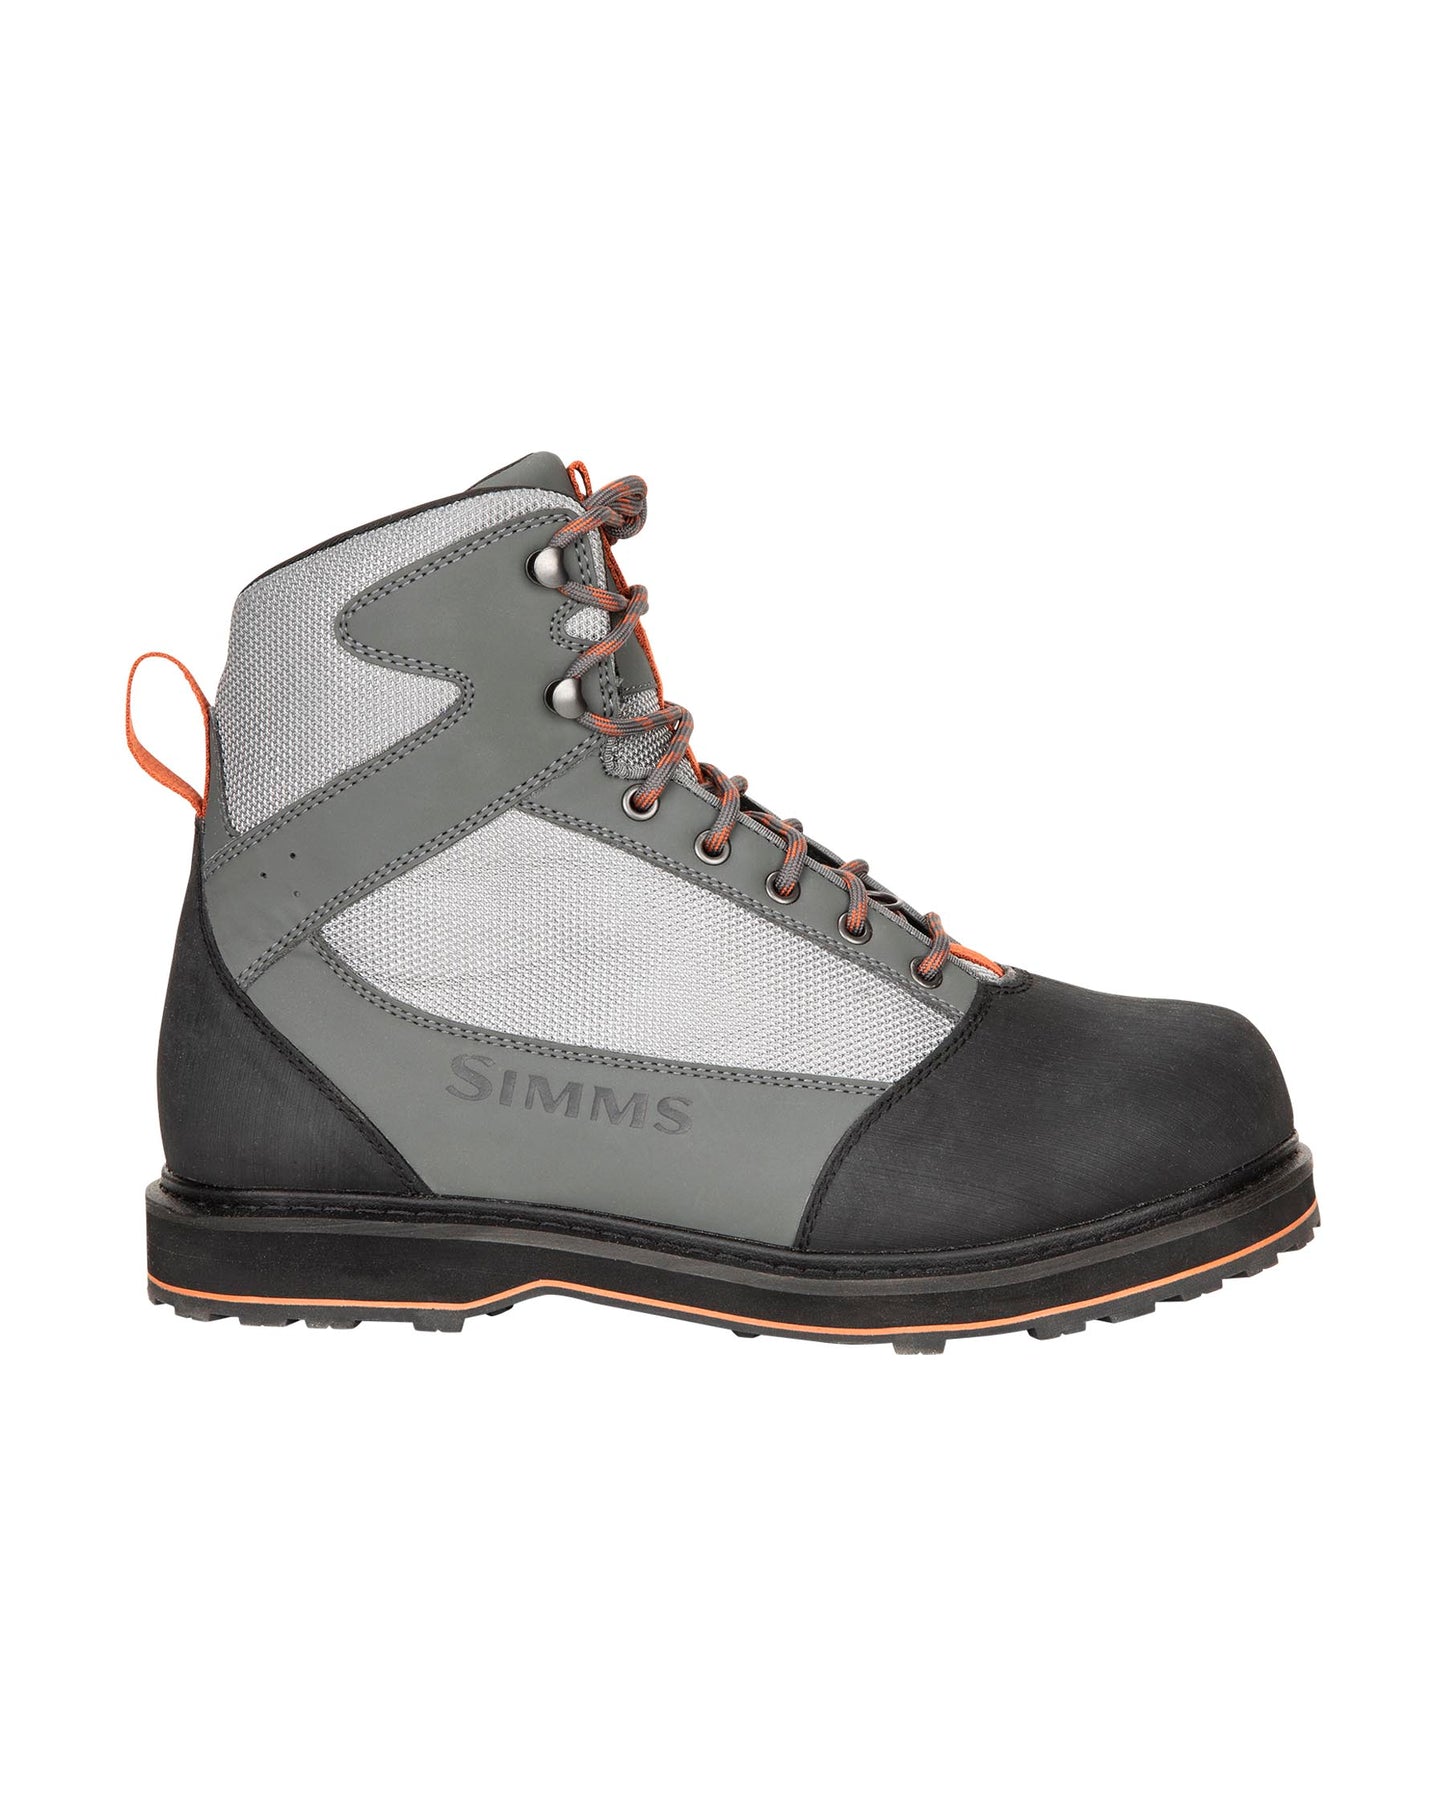 Kid's Tributary Wading Boot - Rubber Soles